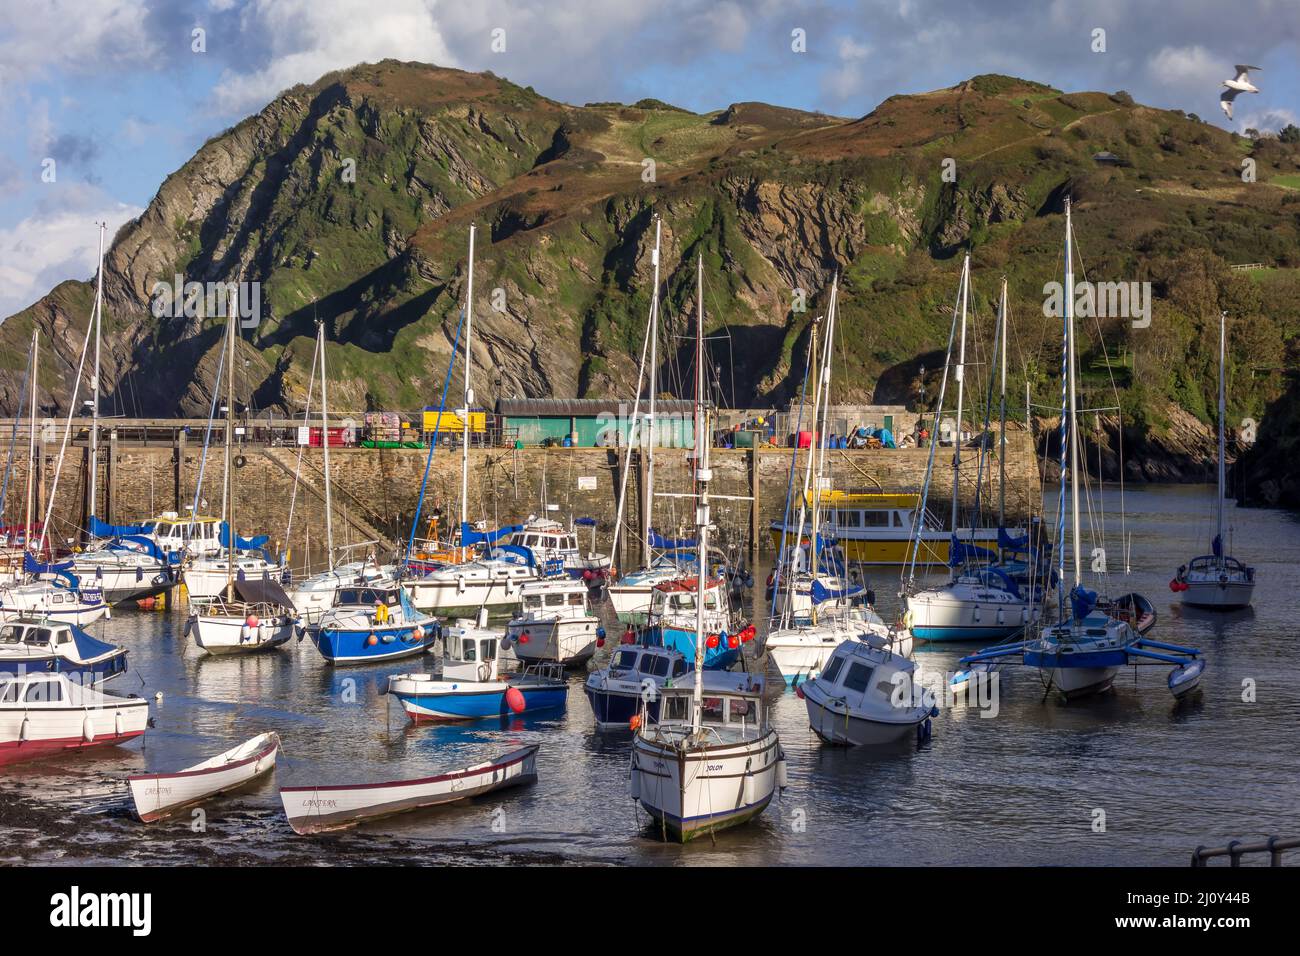 ILFRACOMBE, DEVON, UK - OCTOBER 19 : View of Ilfracombe harbour on October 19, 2013 Stock Photo